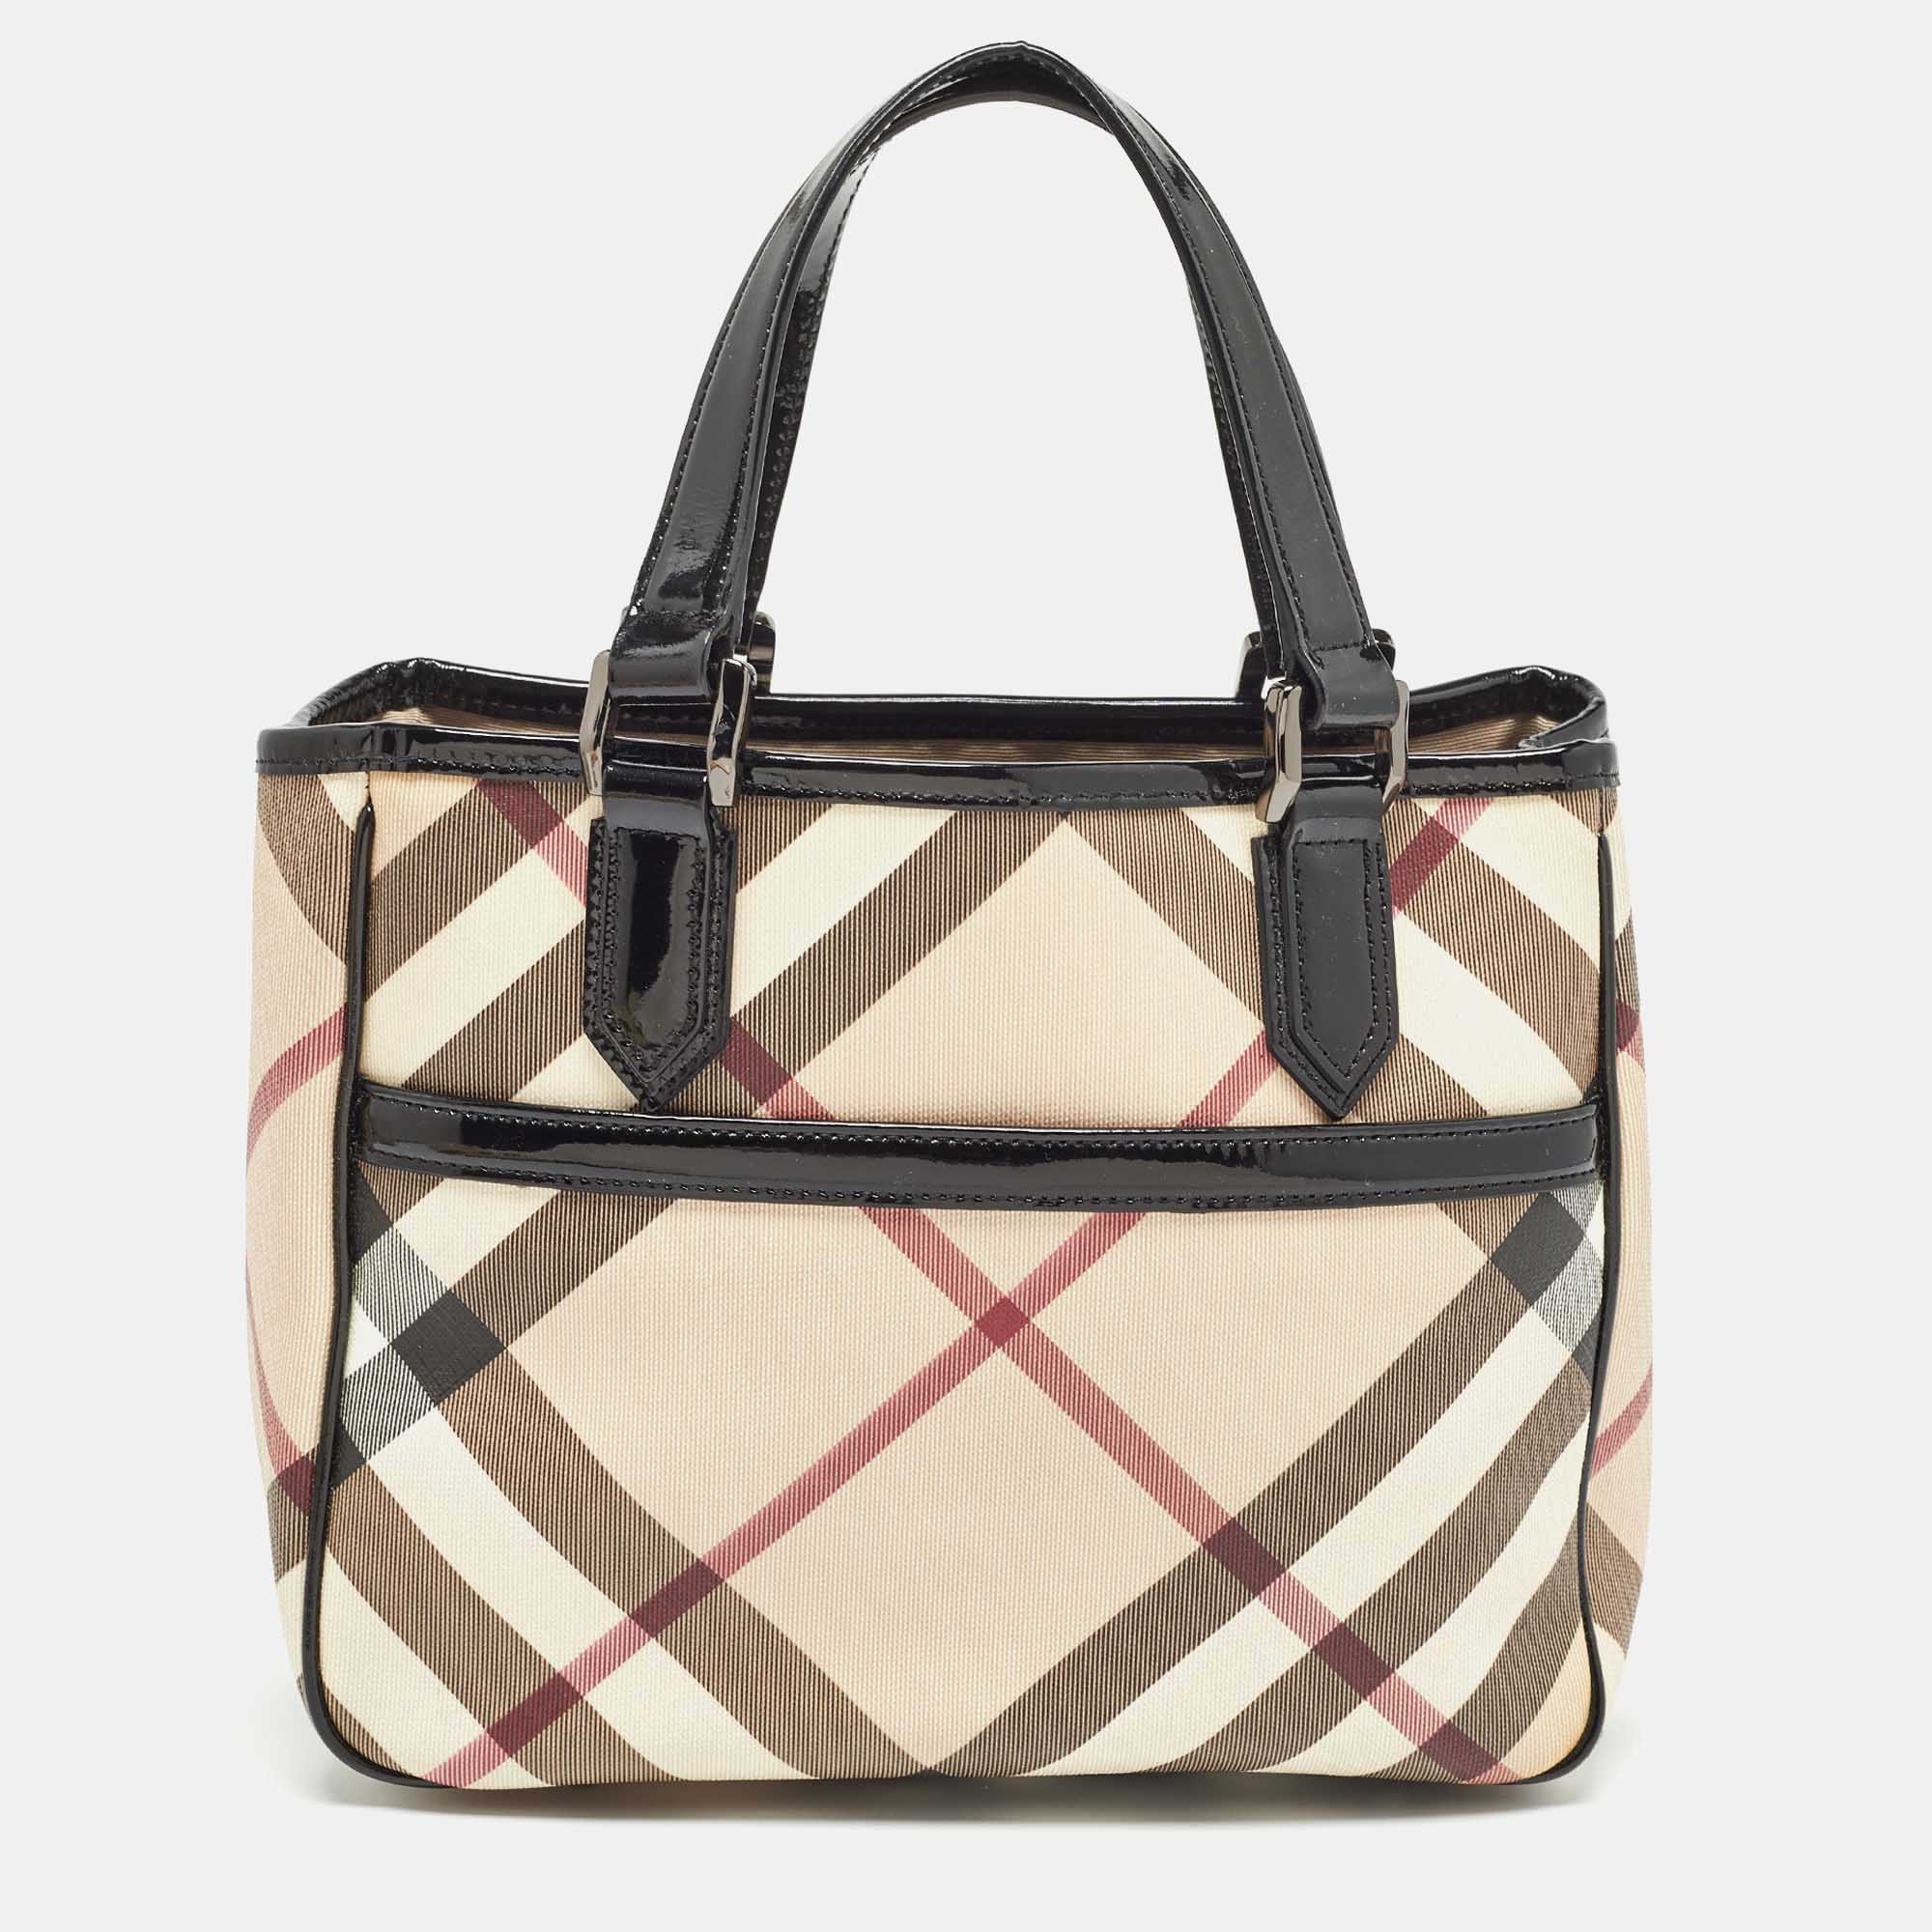 Burberry black/beige nova check pvc and patent leather front pocket tote